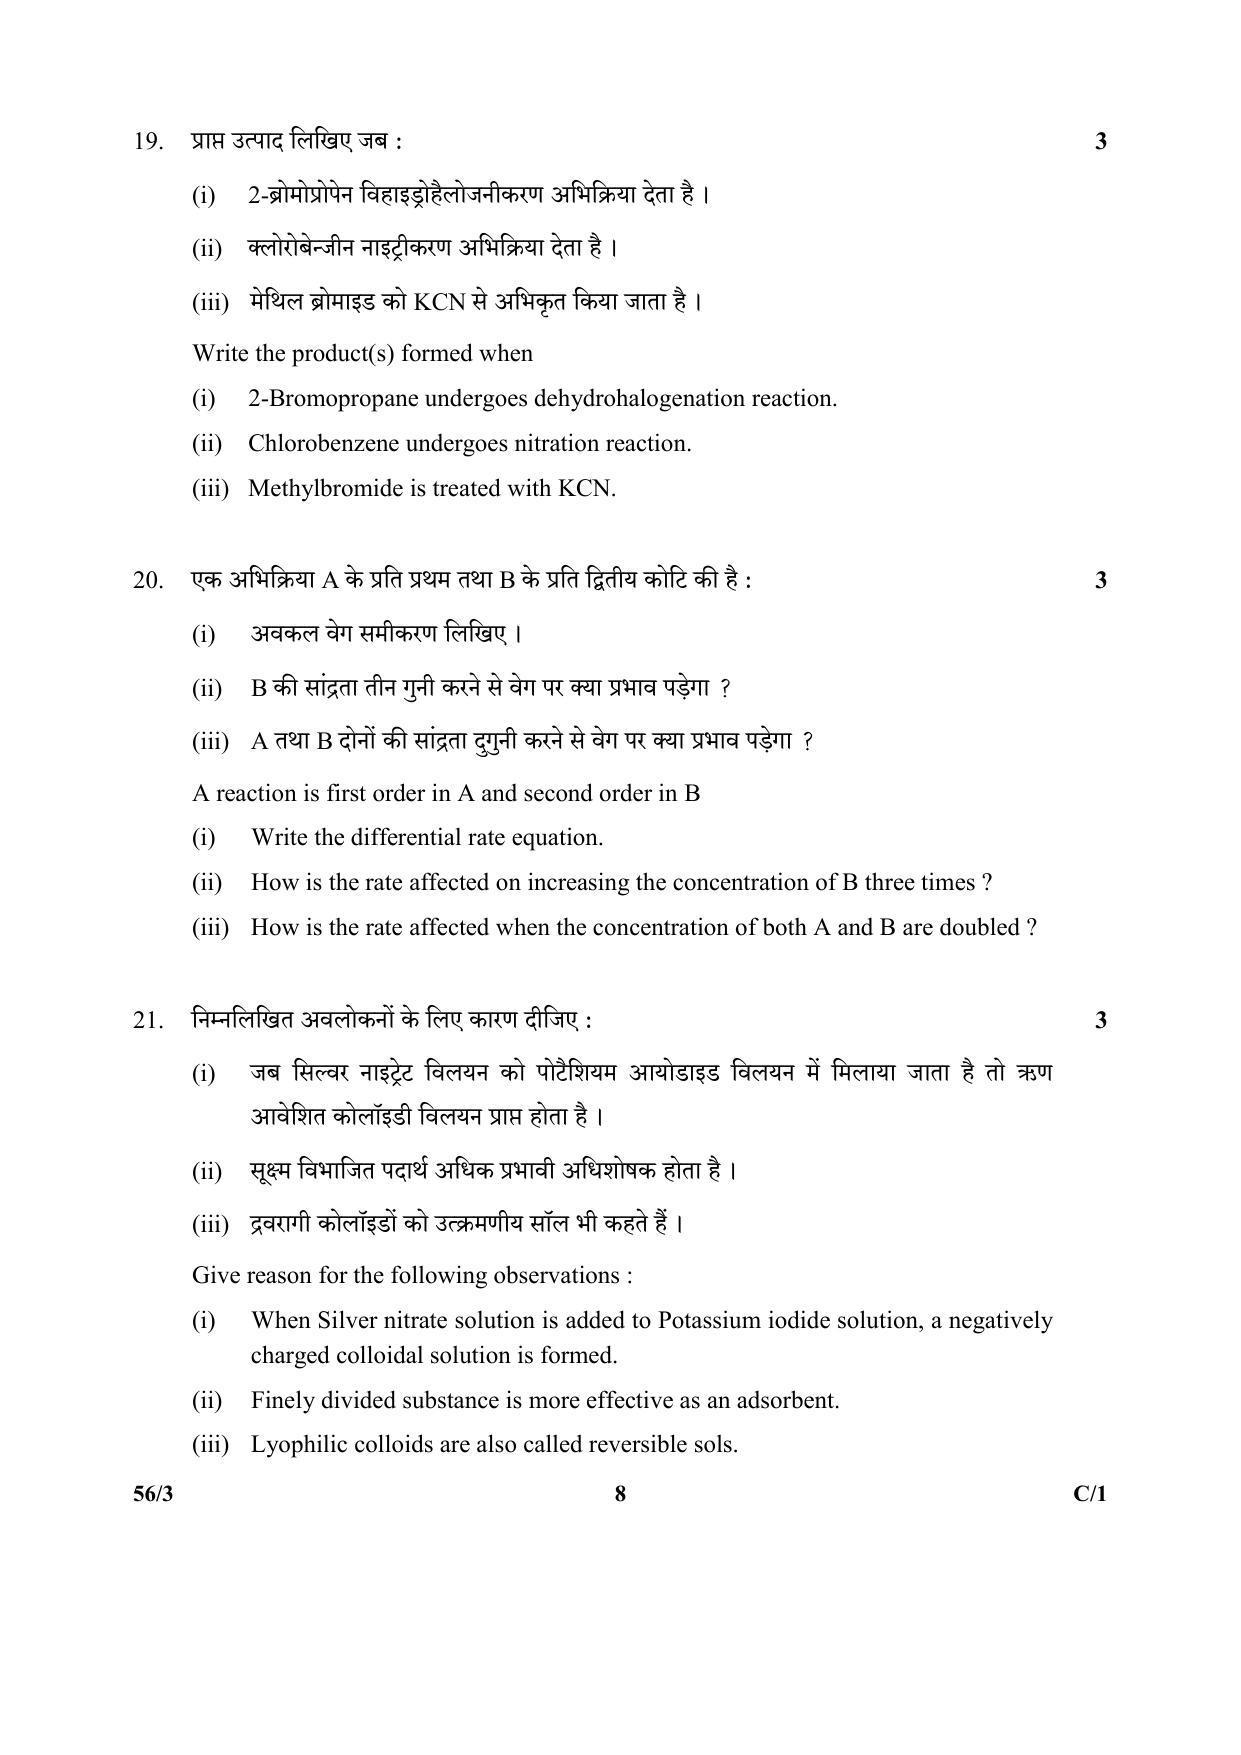 CBSE Class 12 56-3 (Chemistry) 2018 Compartment Question Paper - Page 8